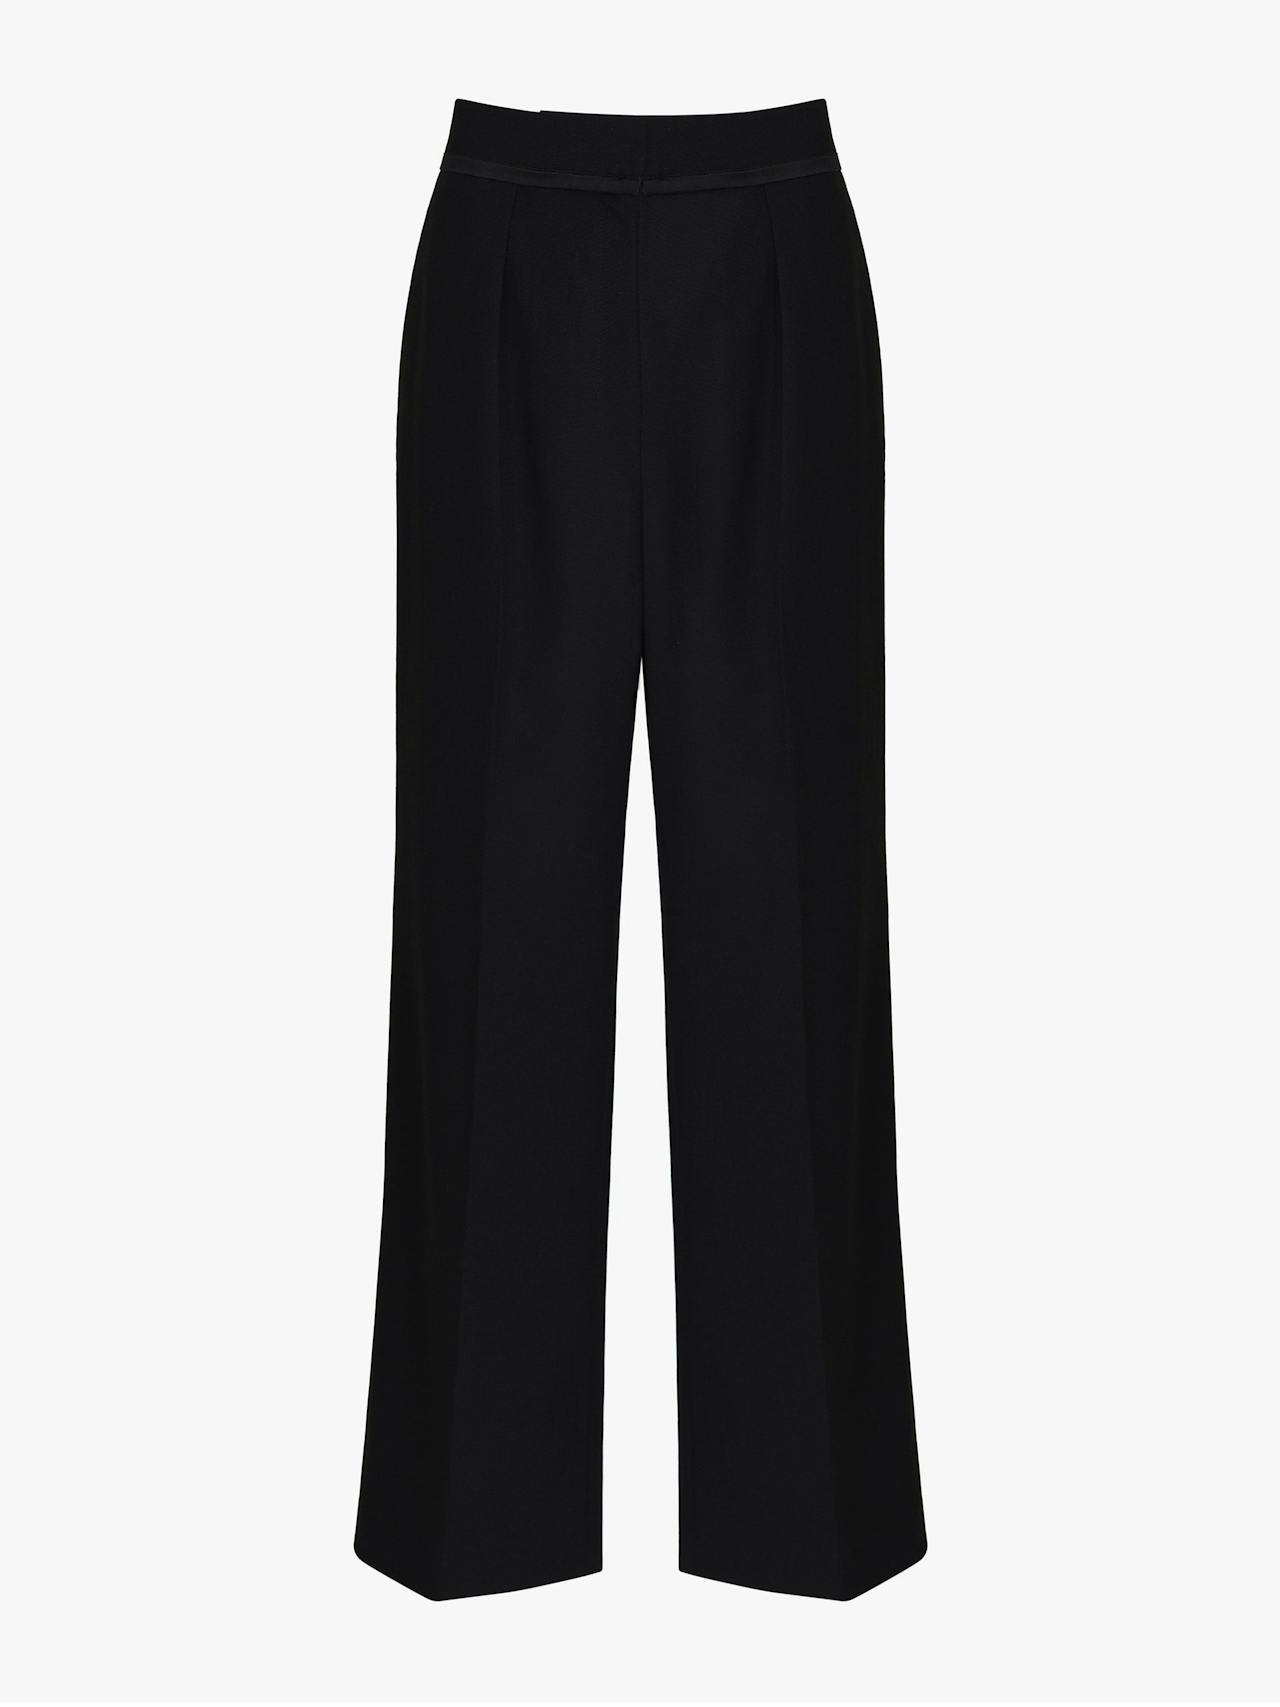 Black high-waisted wool trousers